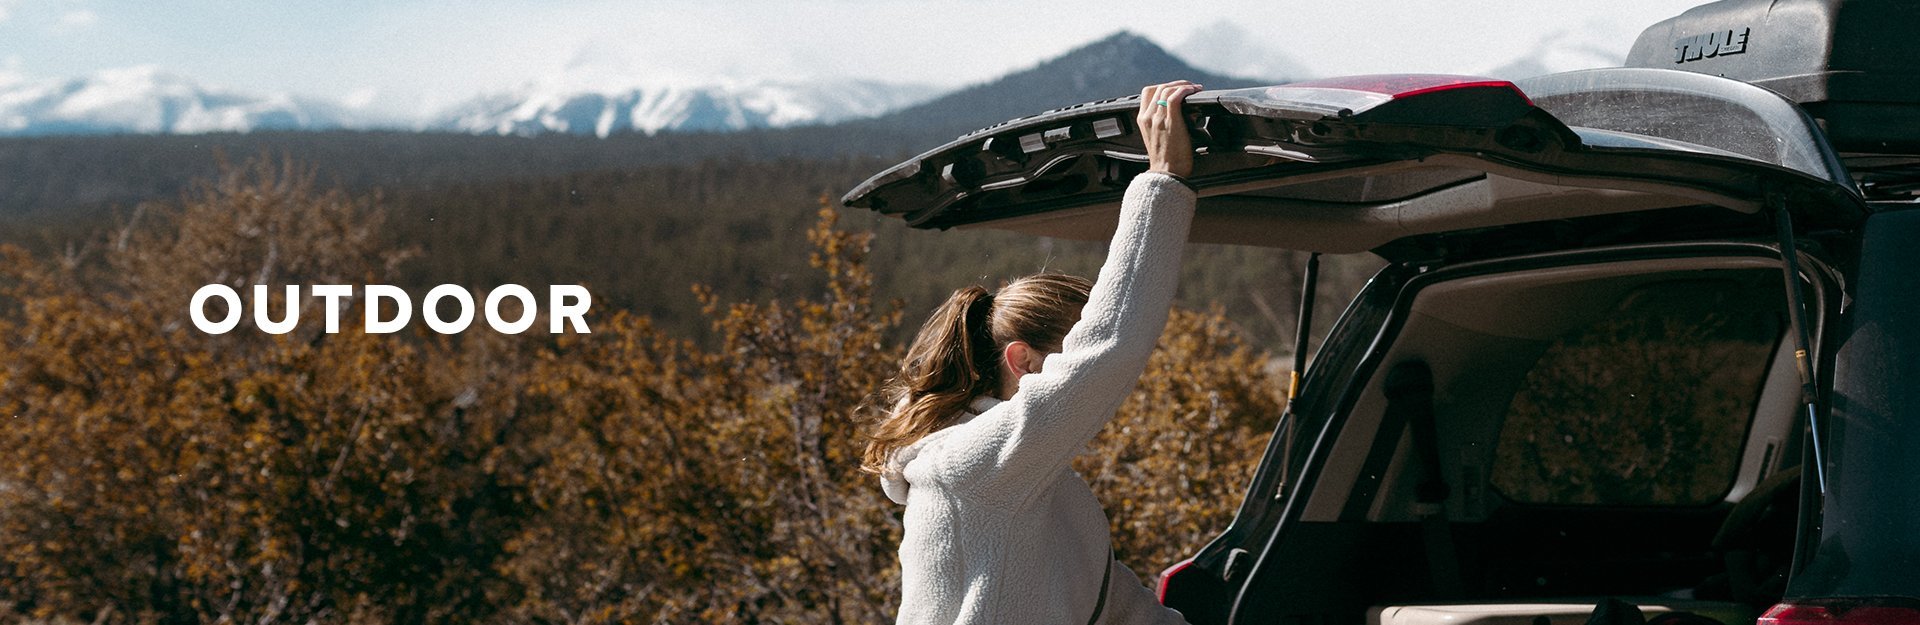 Outdoor, a woman holds up the hatch of her car with mountains in the background